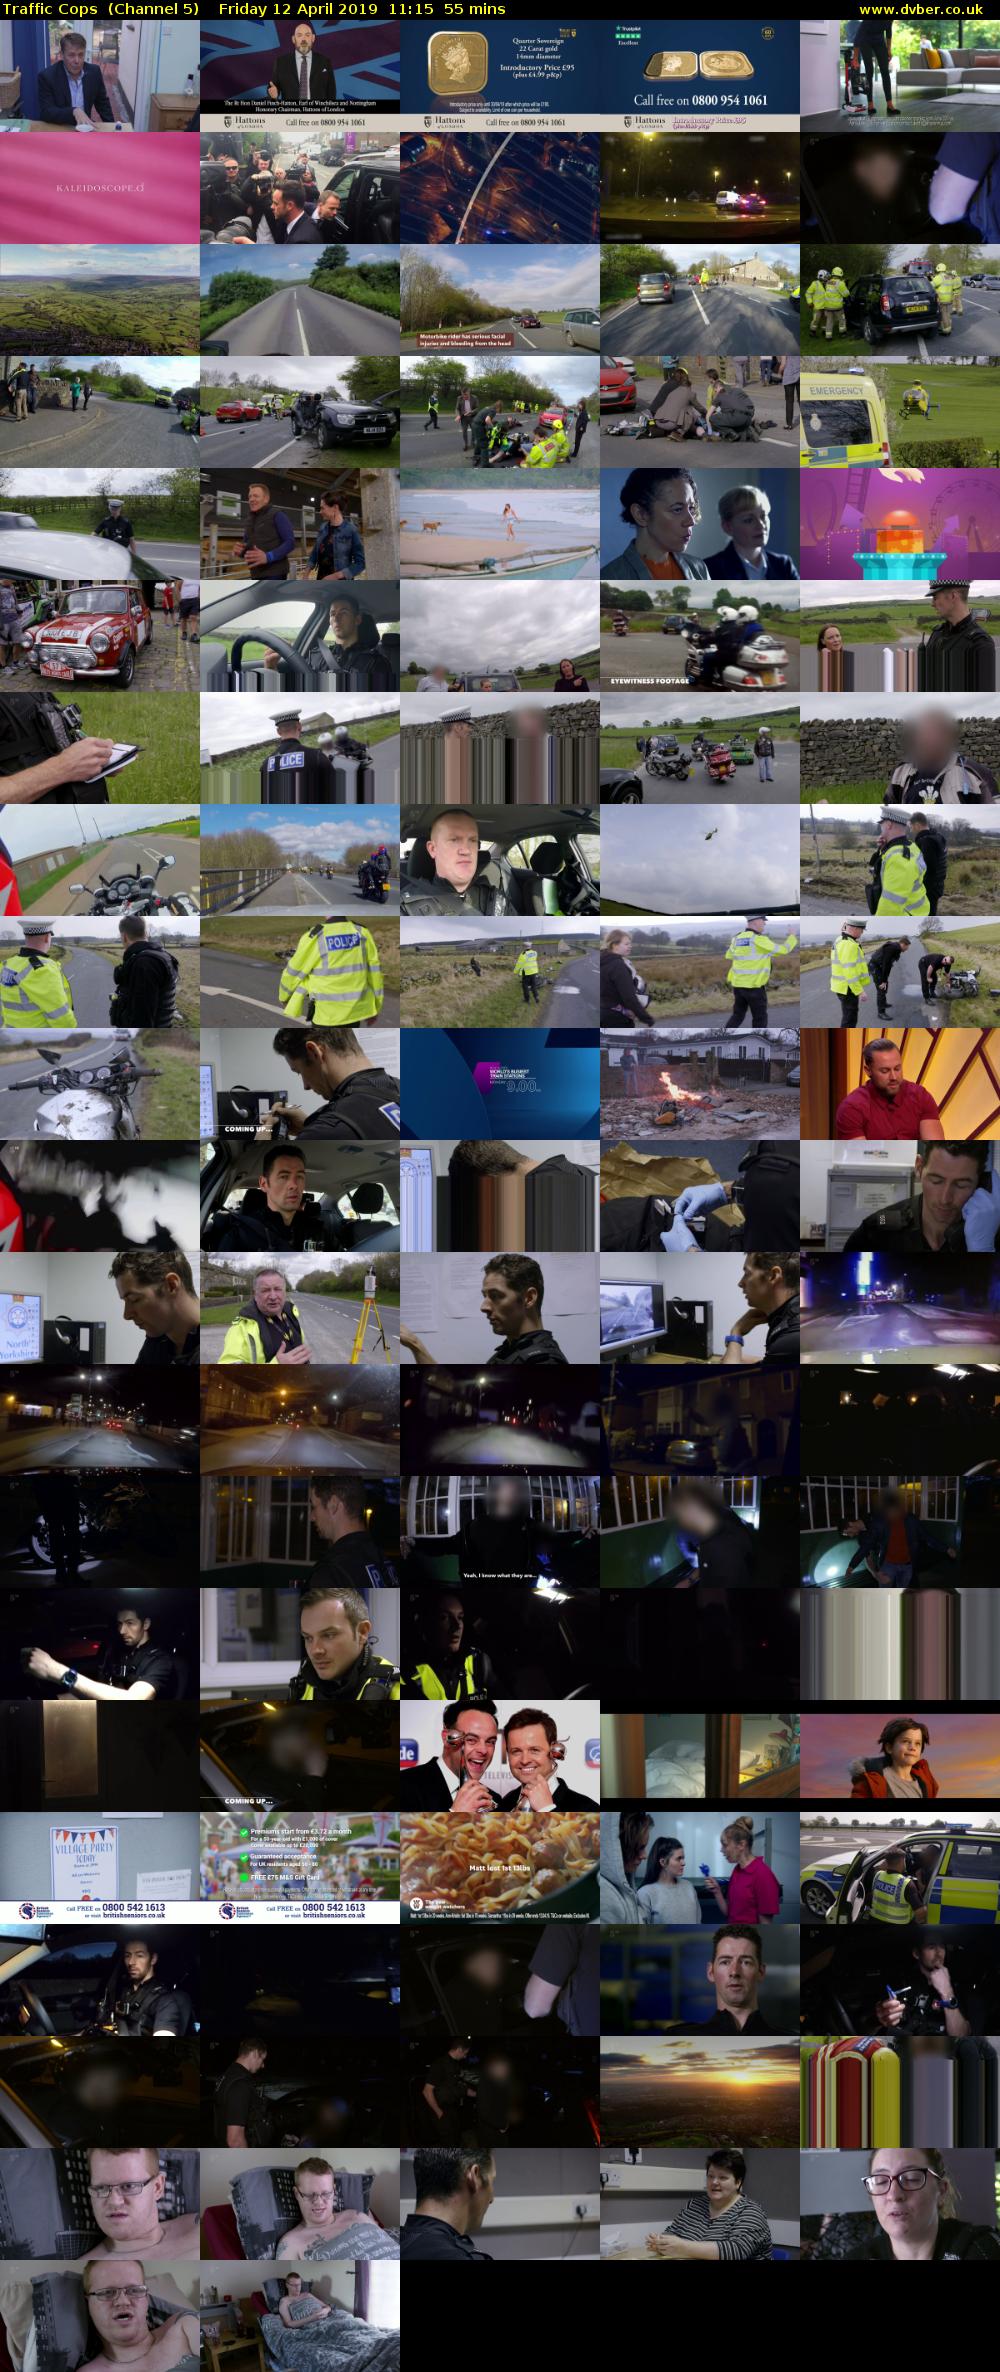 Traffic Cops  (Channel 5) Friday 12 April 2019 11:15 - 12:10